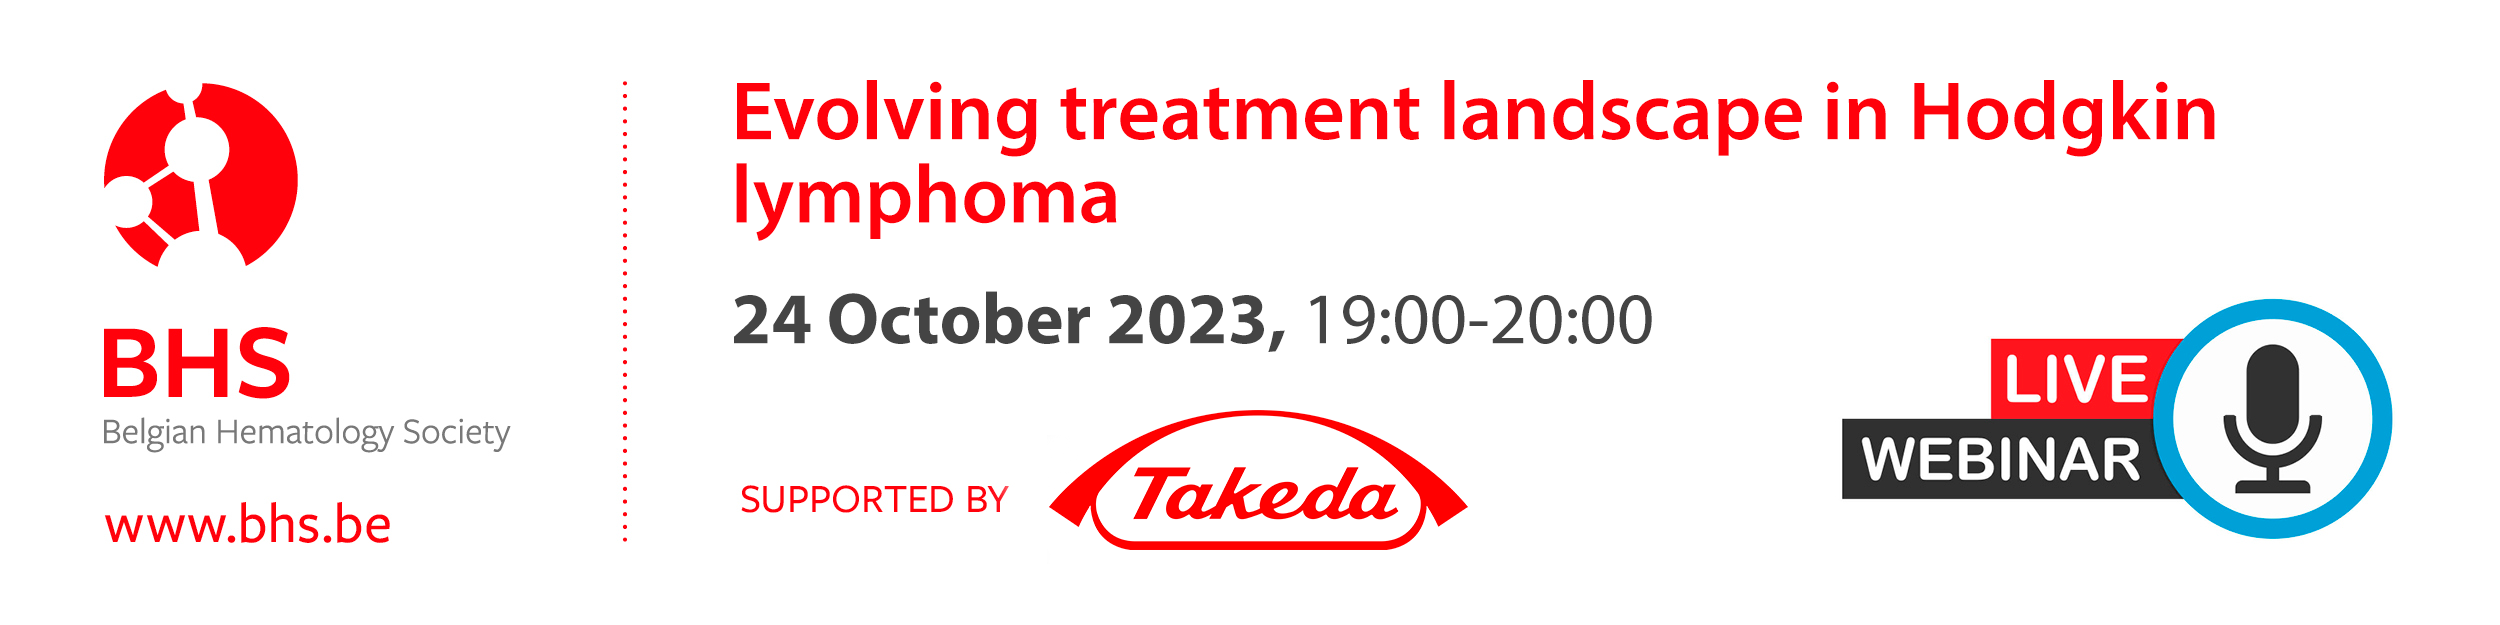 BHS Webinar supported by Takeda